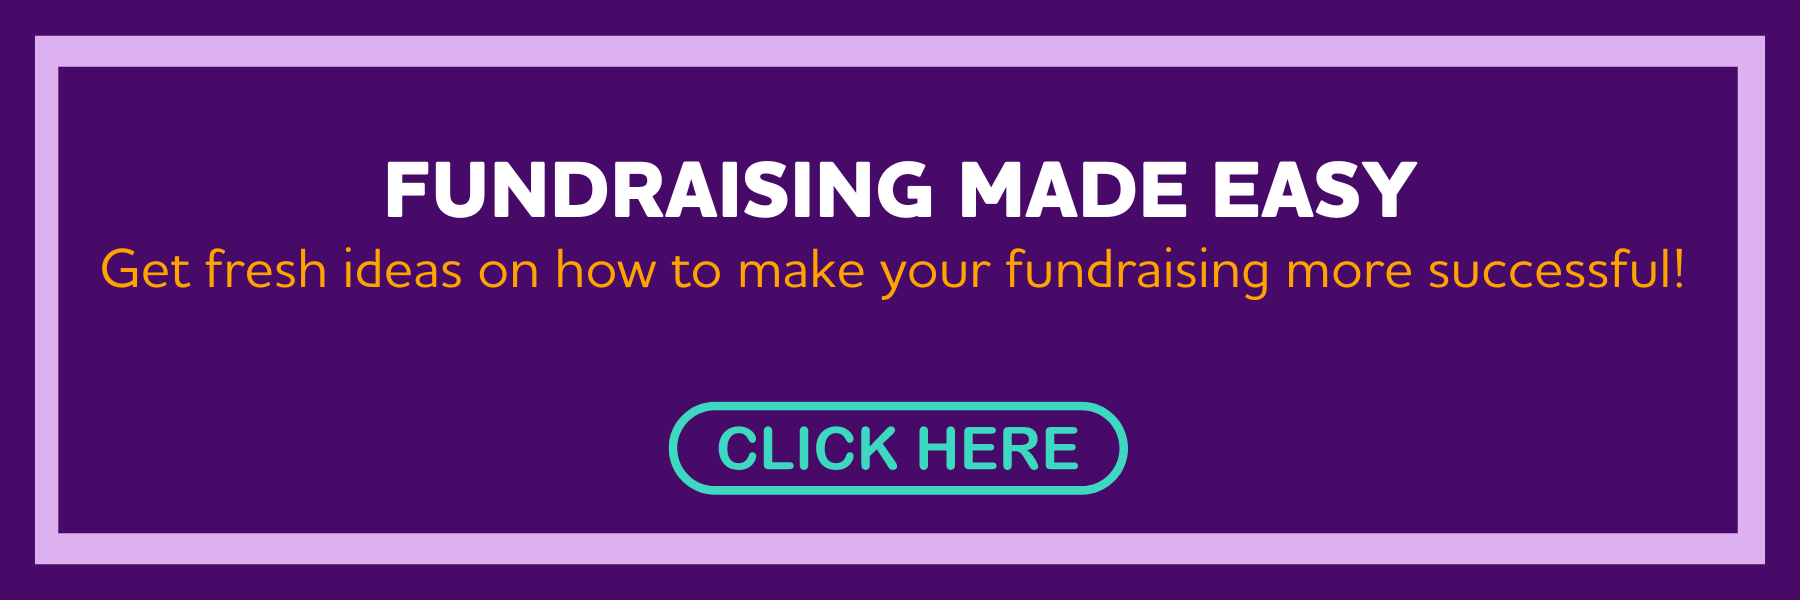 fundraising_tips_button231482.png